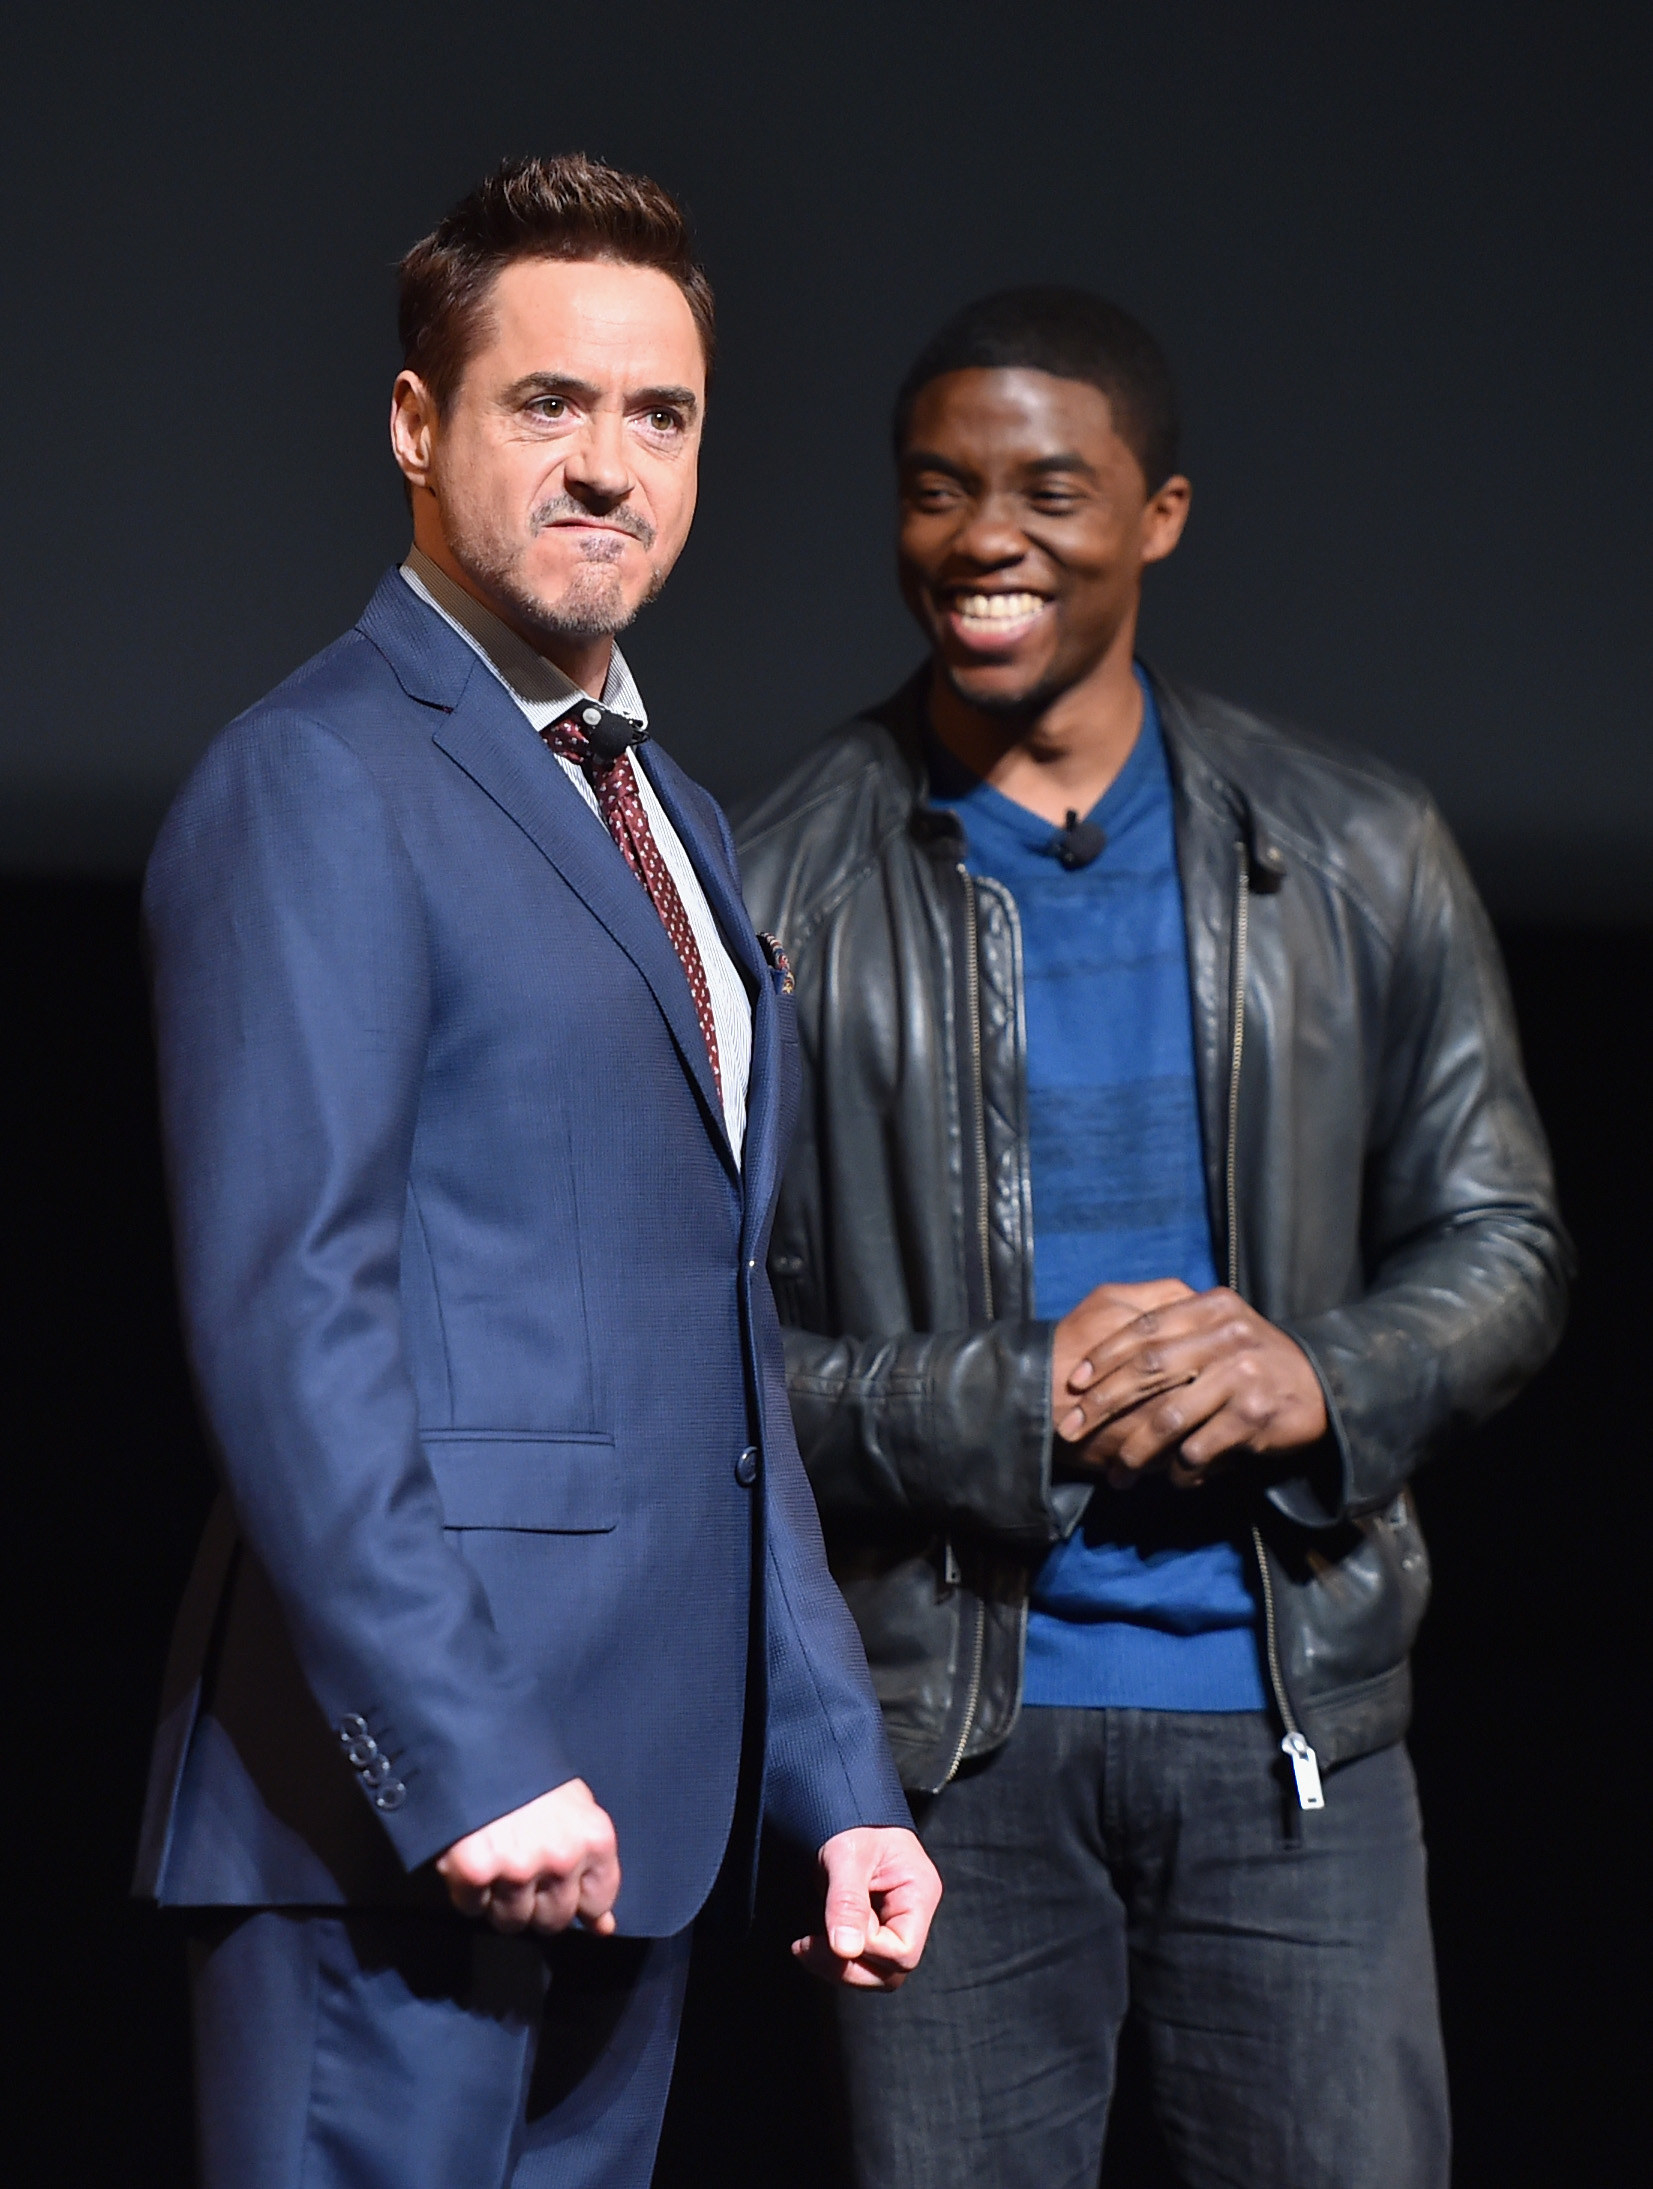 Robert Downey Jr. grunts and Chadwick Boseman laughs on stage together